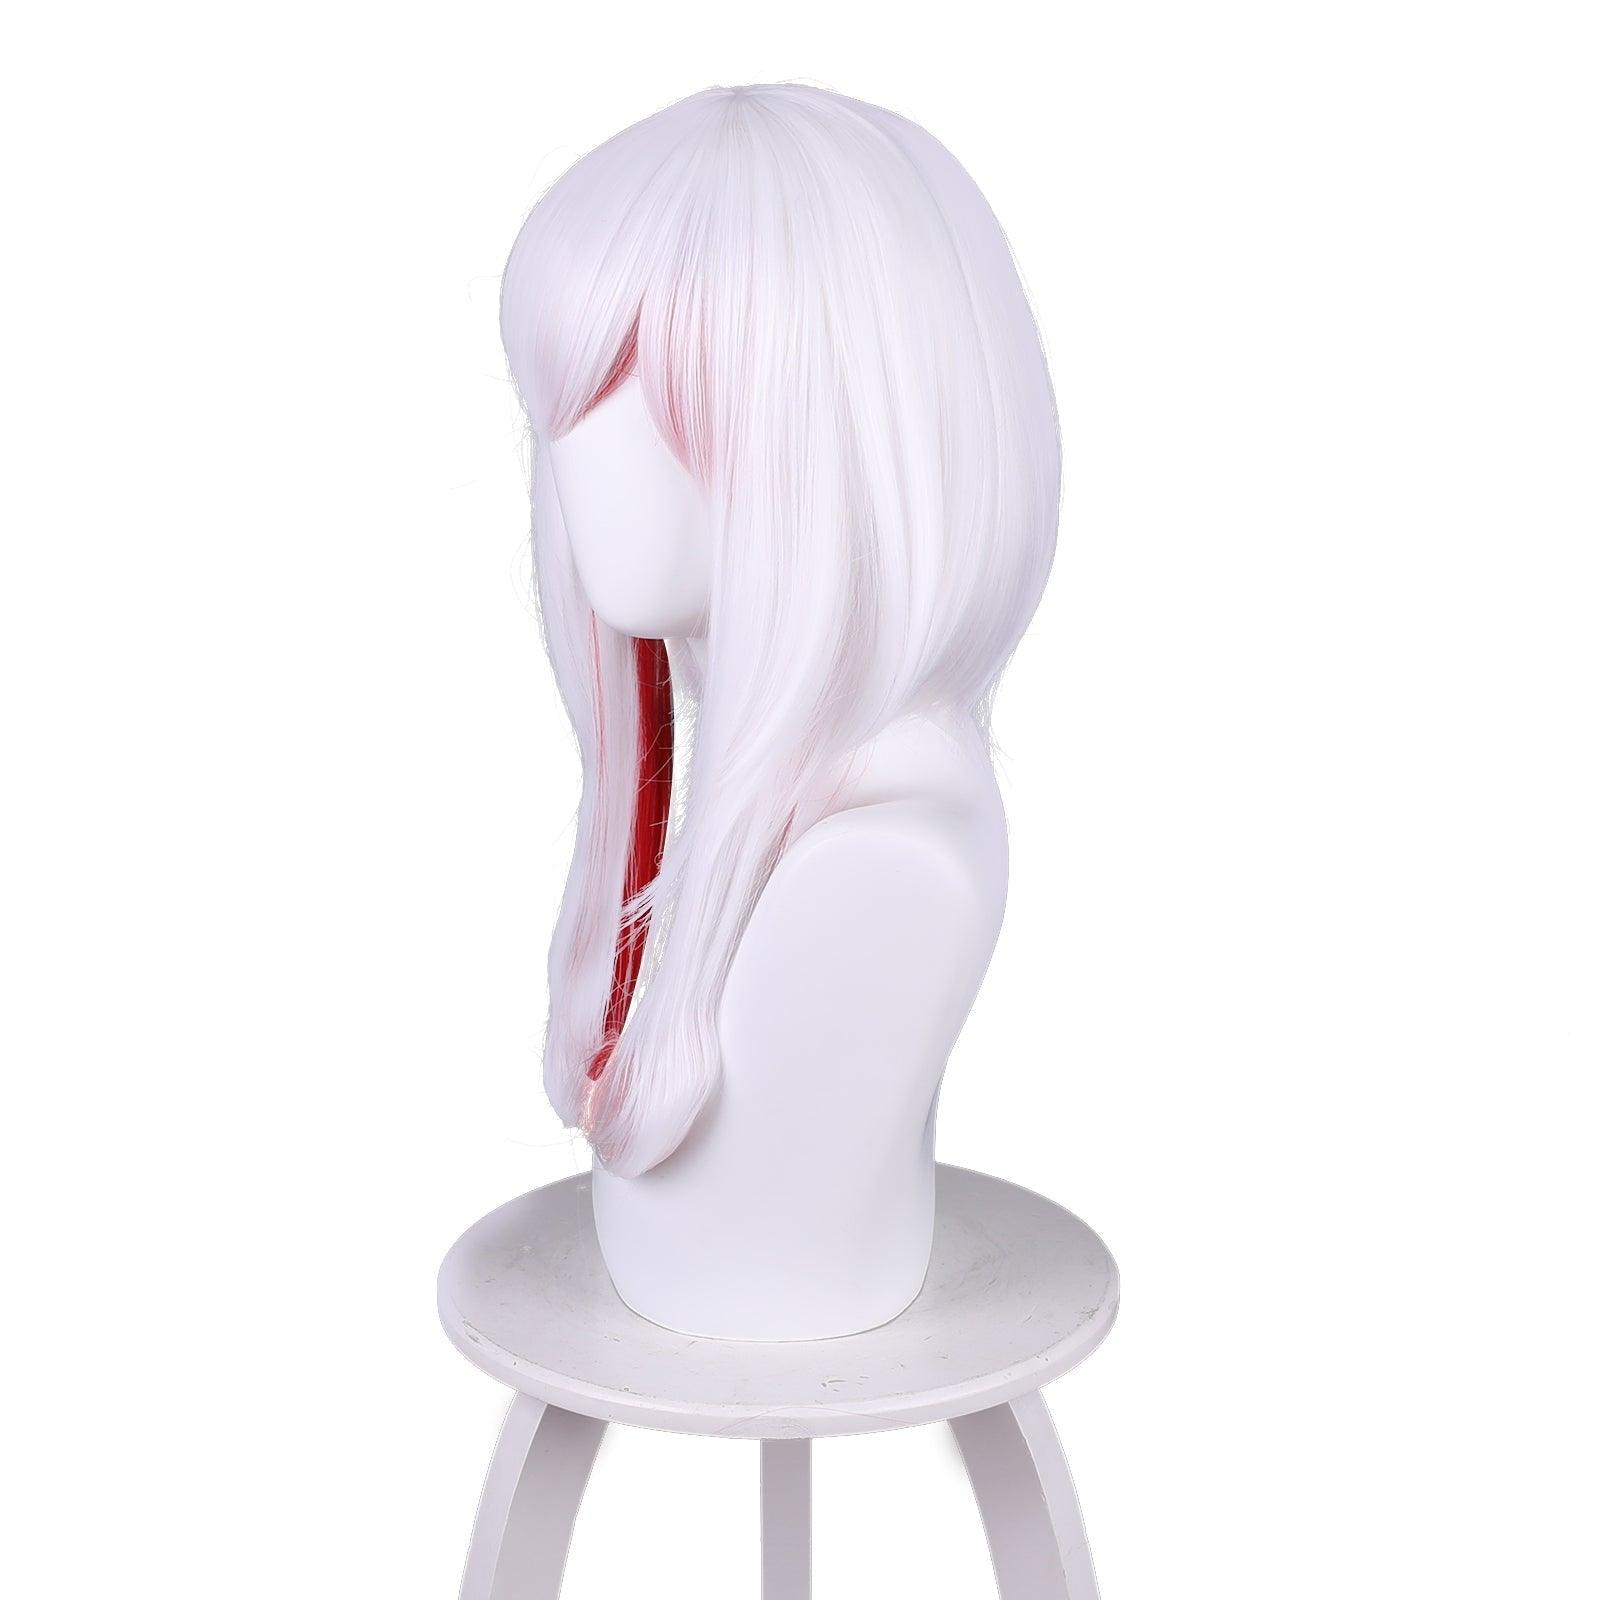 coscrew Anime Cosplay Wigs for DESTINY Red and white Cosplay Wig of takt op.Destiny 529AB - coscrew